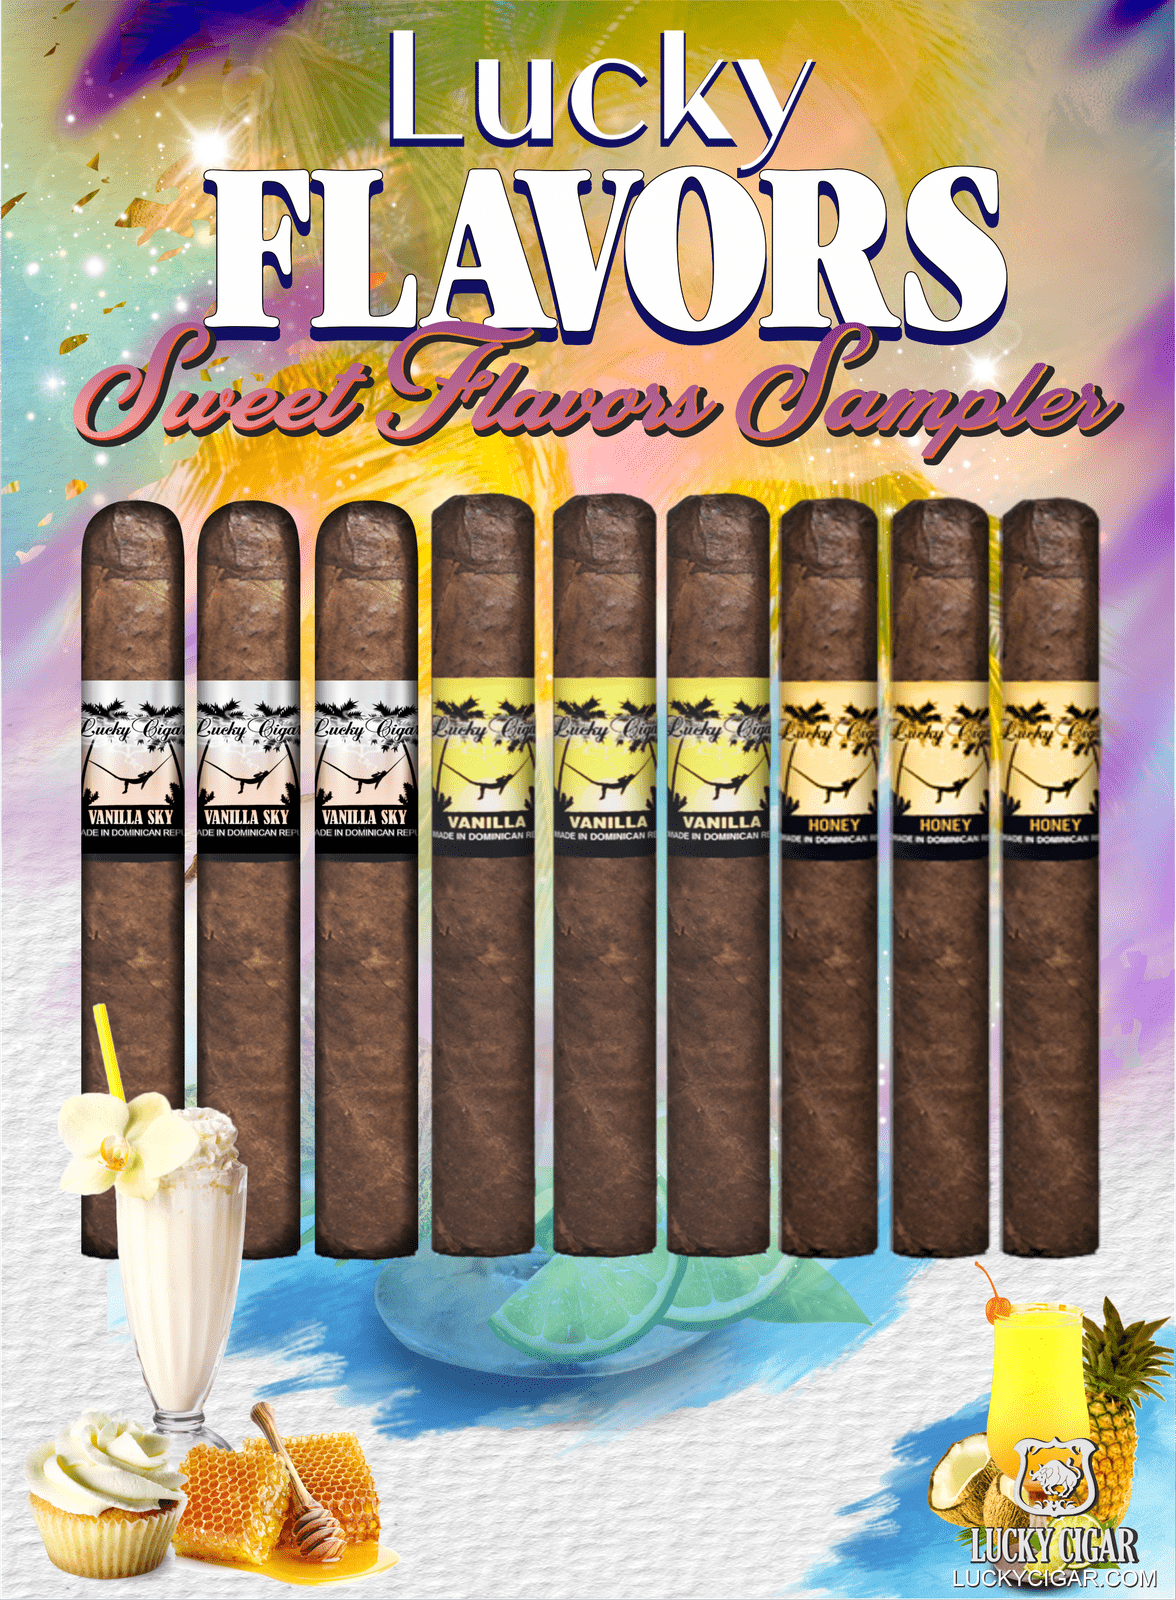 Flavored Cigars: Lucky Flavors 9 Piece Sweets Sampler - Vanilla Sky, Vanilla, Honey 3 Vanilla Sky 5x42 Cigars 3 Vanilla 5x42 Cigars 3 Honey 5x42 Cigars